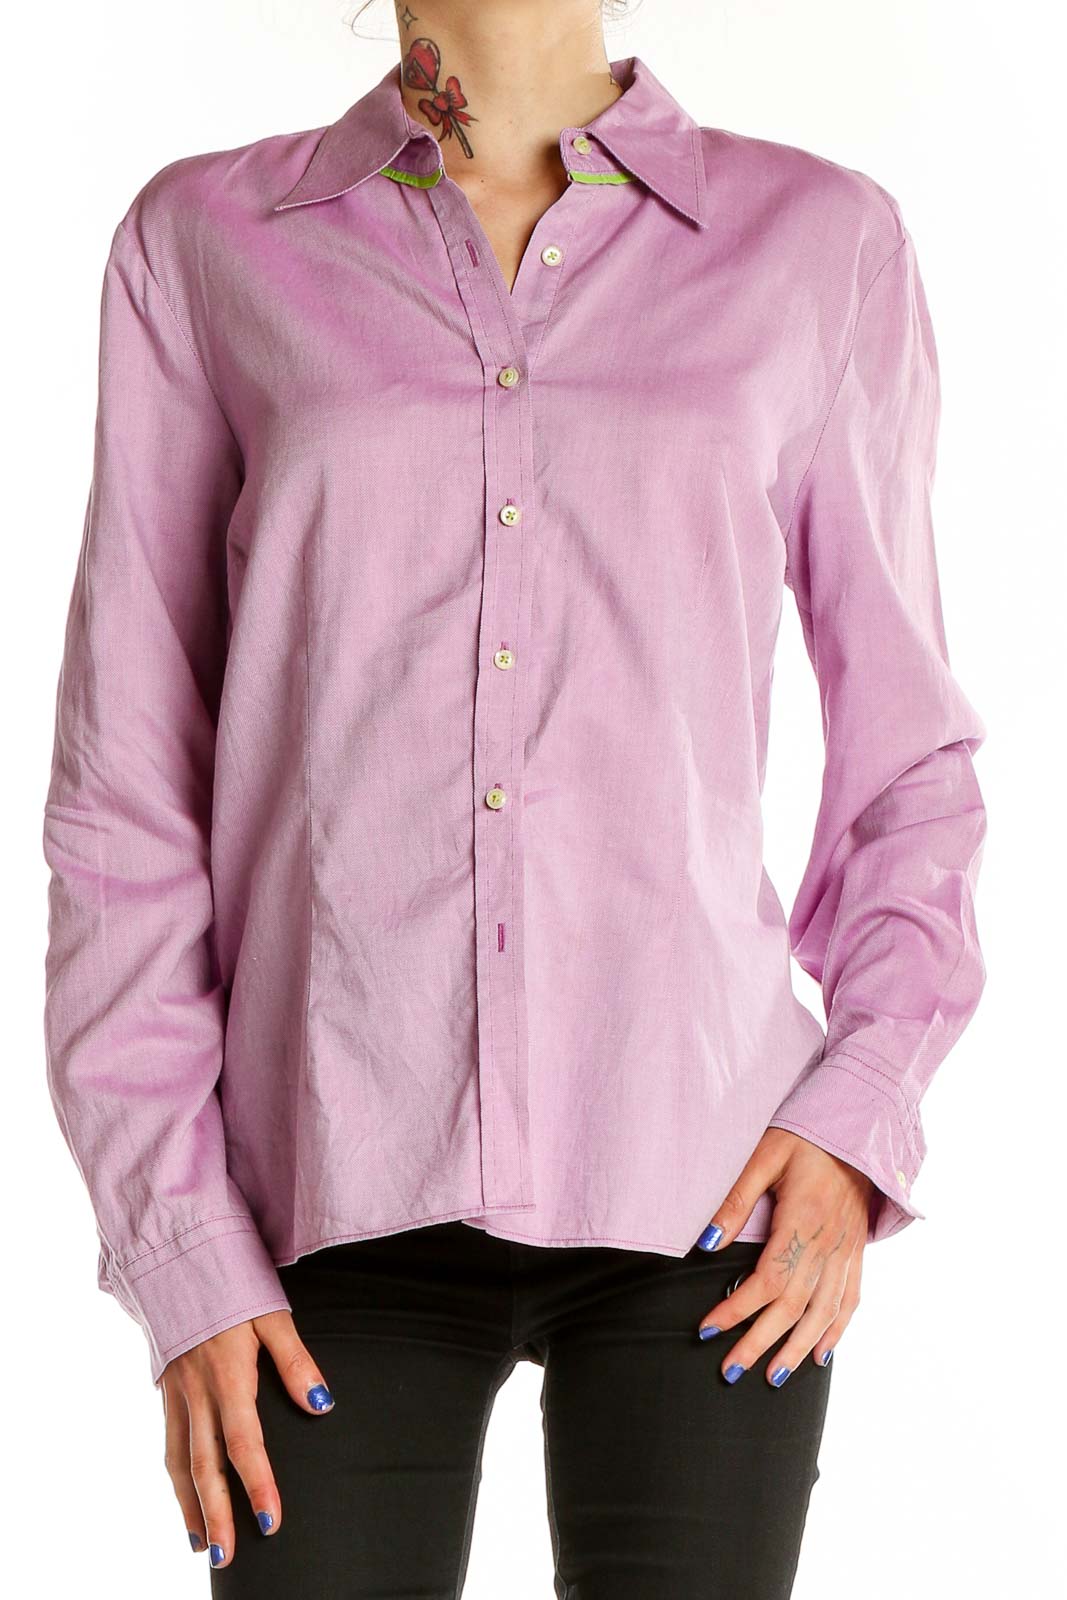 Pink Formal Top Front